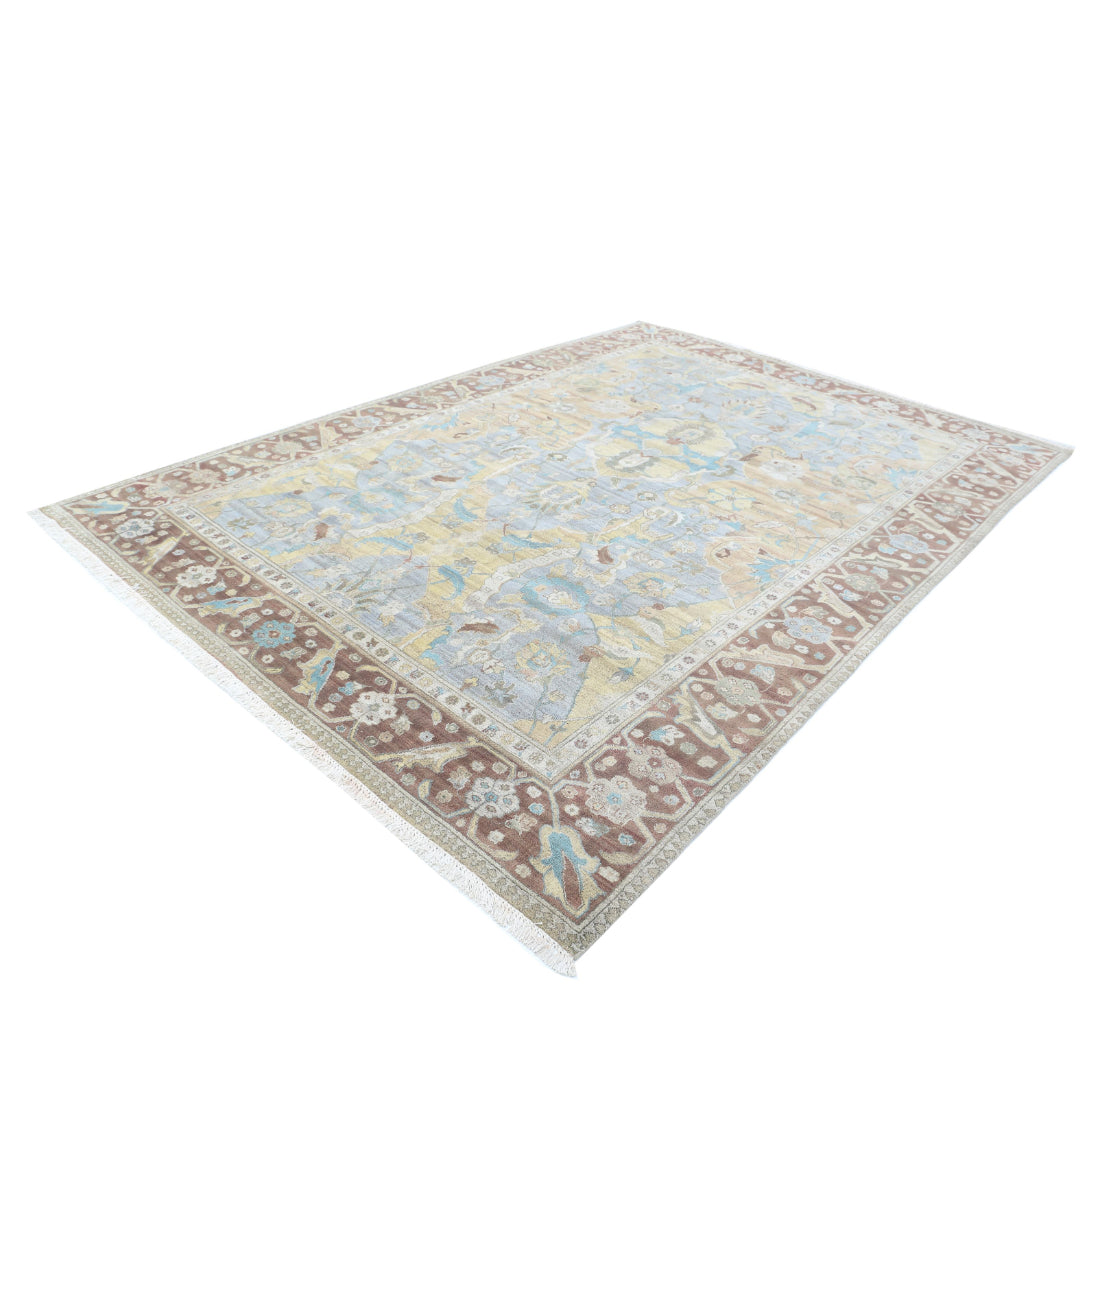 Hand Knotted Agra Polonaise Wool Rug - 8'1'' x 11'4'' 8'1'' x 11'4'' (268 X 363) / Grey / Brown